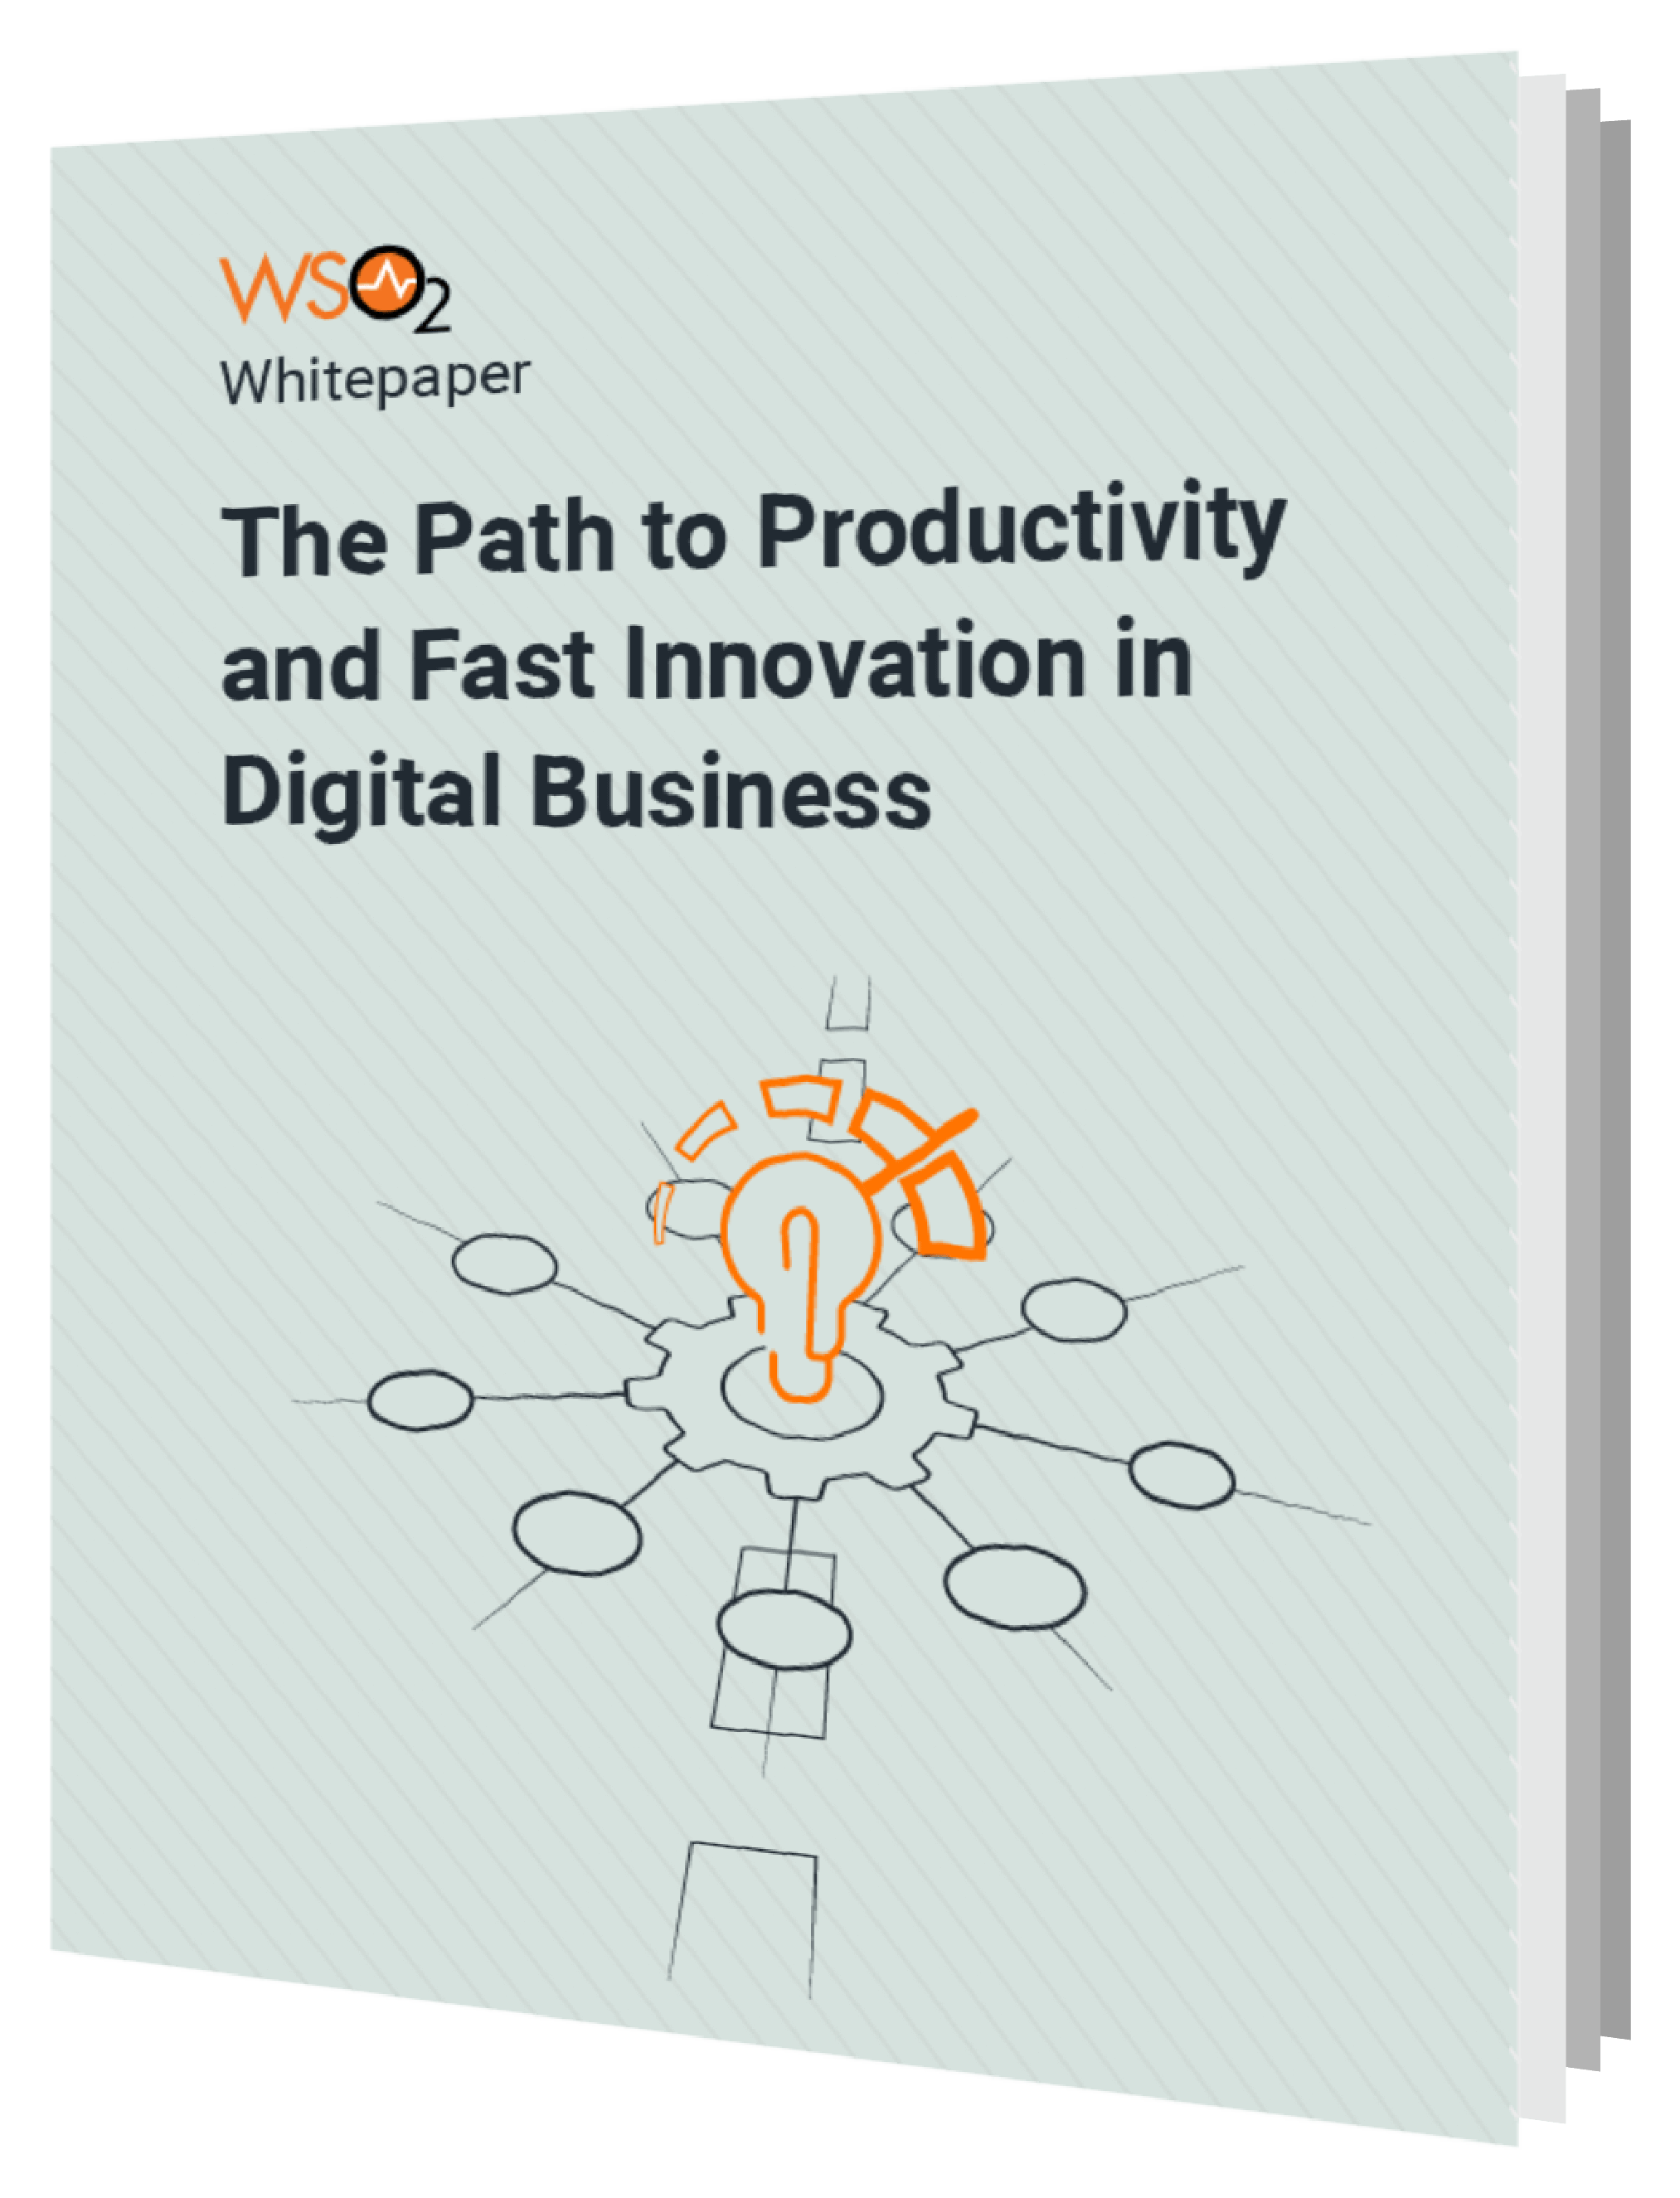 The Path to Productivity and Fast Innovation in Digital Business